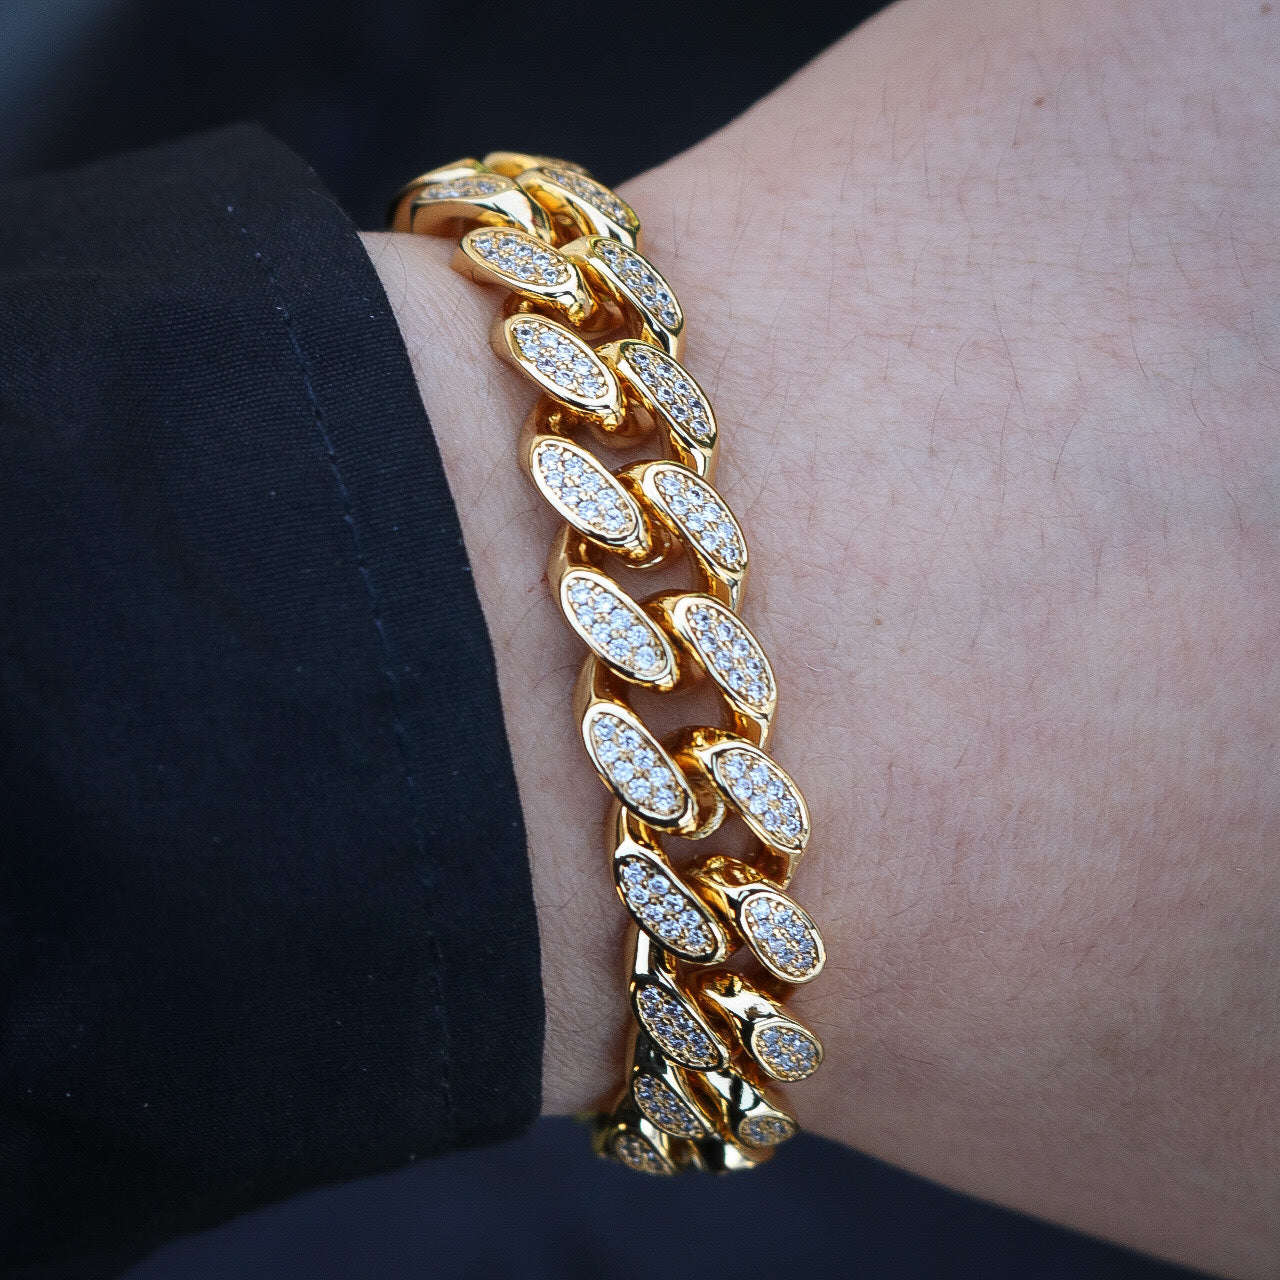 Big 20mm Full Iced Out 18k Gold Cuban Link Diamond Bracelet – Icey Bling